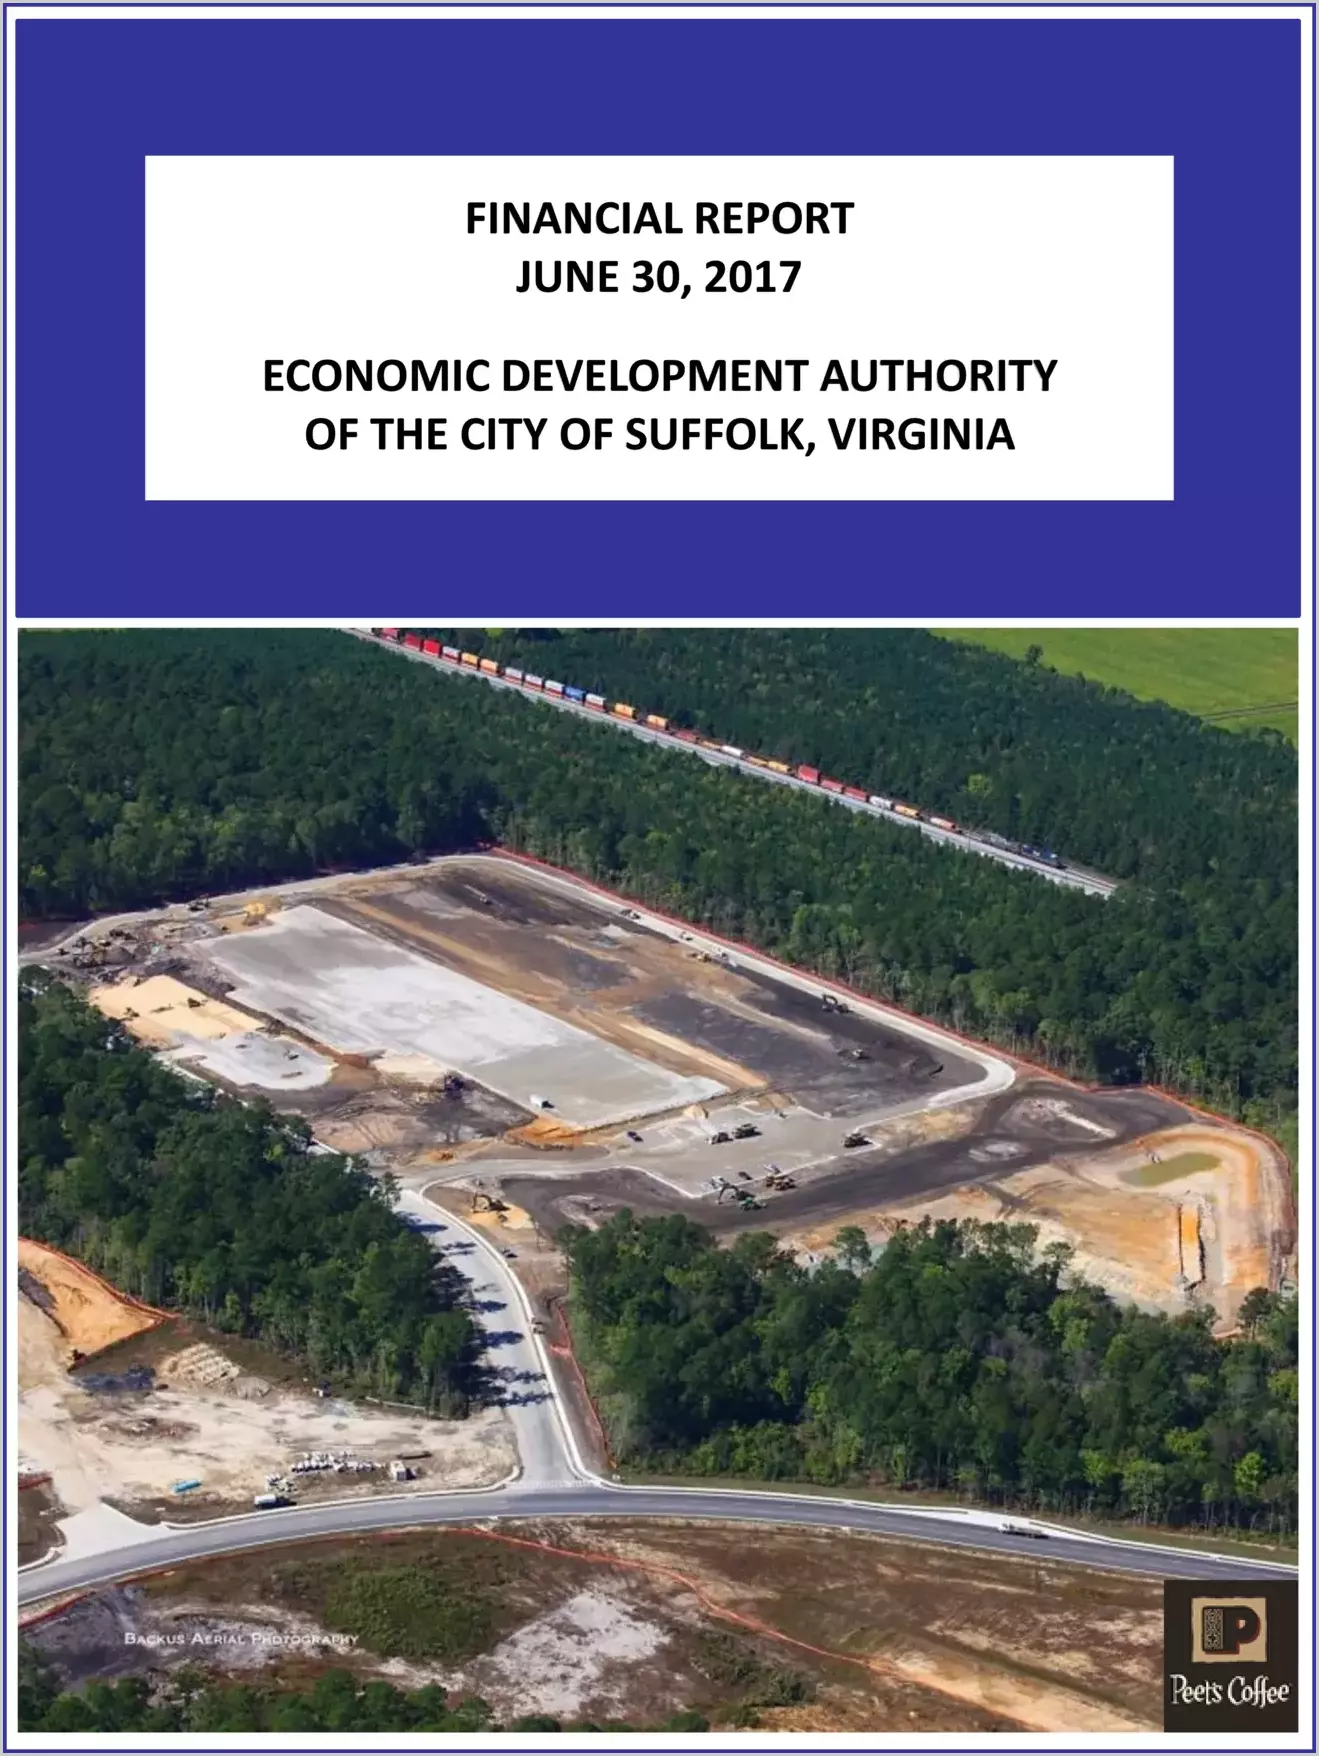 2017 ABC/Other Annual Financial Report  for Suffolk Economic Development Authority